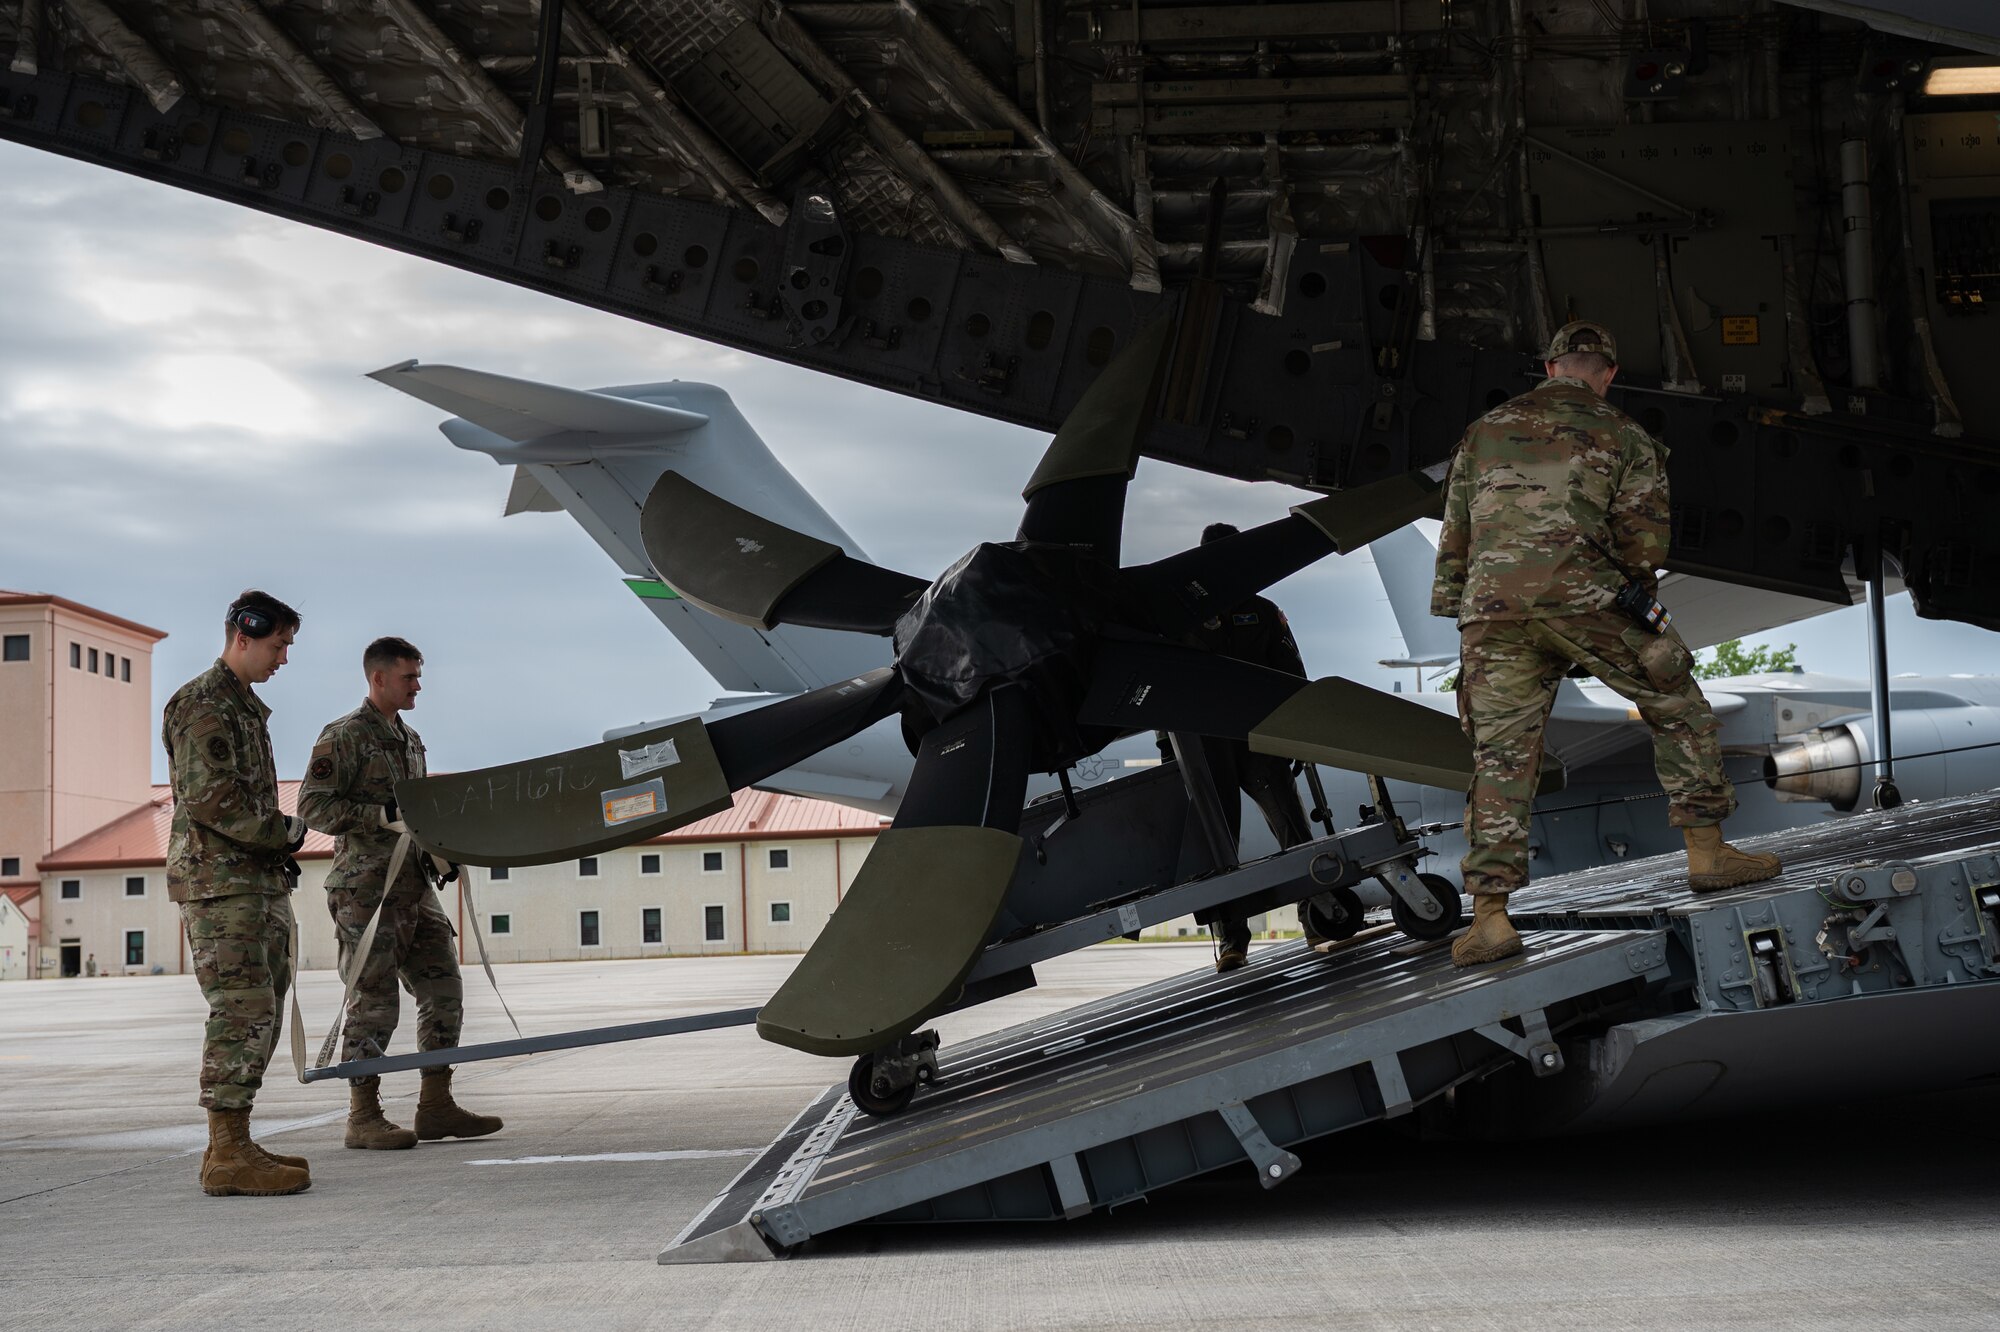 Airmen from the 724th Air Mobility Squadron, 190th Air Refueling Wing, 62nd Aircraft Maintenance Squadron, and 7th Air Mobility Squadron, load an aircraft propeller onto a C-17 Globemaster III at Aviano Air Base, Italy, May 16, 2023, in support of Defender Exercise 23.